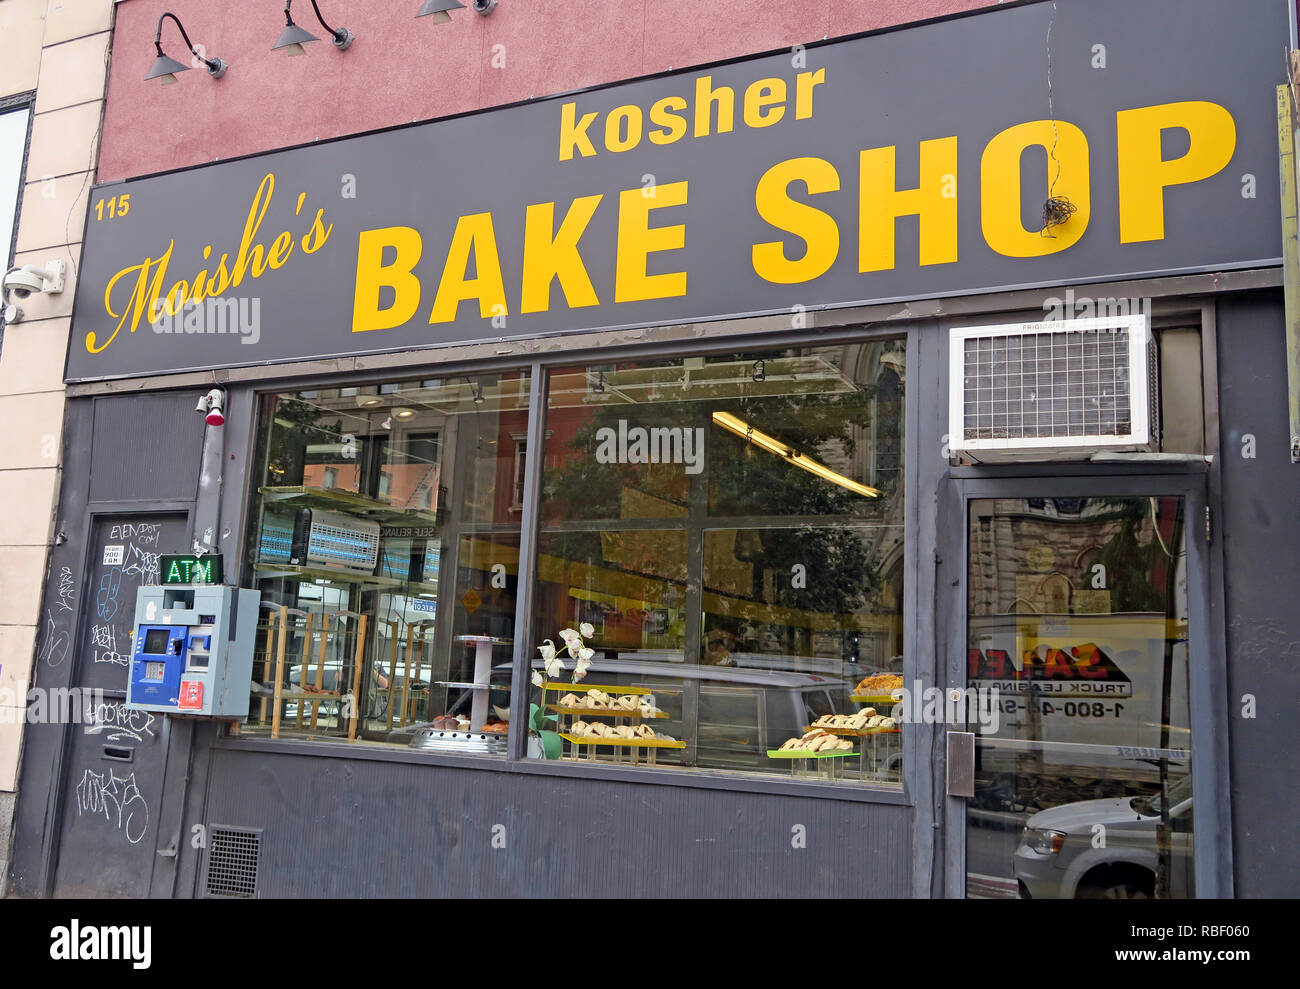 Casher Moishes Bake Shop 115 2nd Avenue, East Village, Manhattan, New York, NYC, USA Banque D'Images